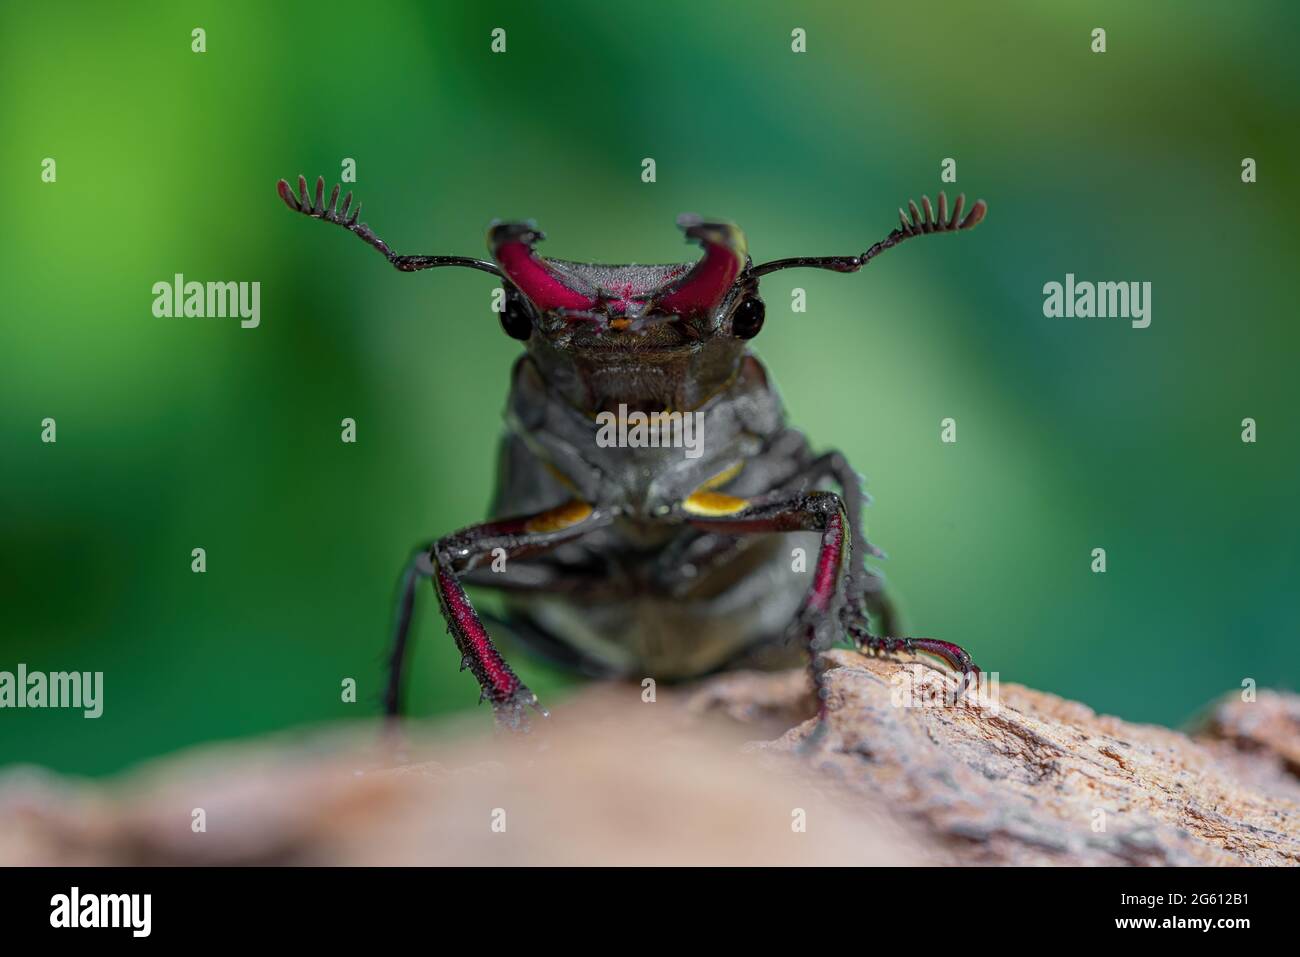 Front view of male European stag beetle (Lucanus cervus) on red stone isolated on blurred green background. Outdoor macro photography Stock Photo